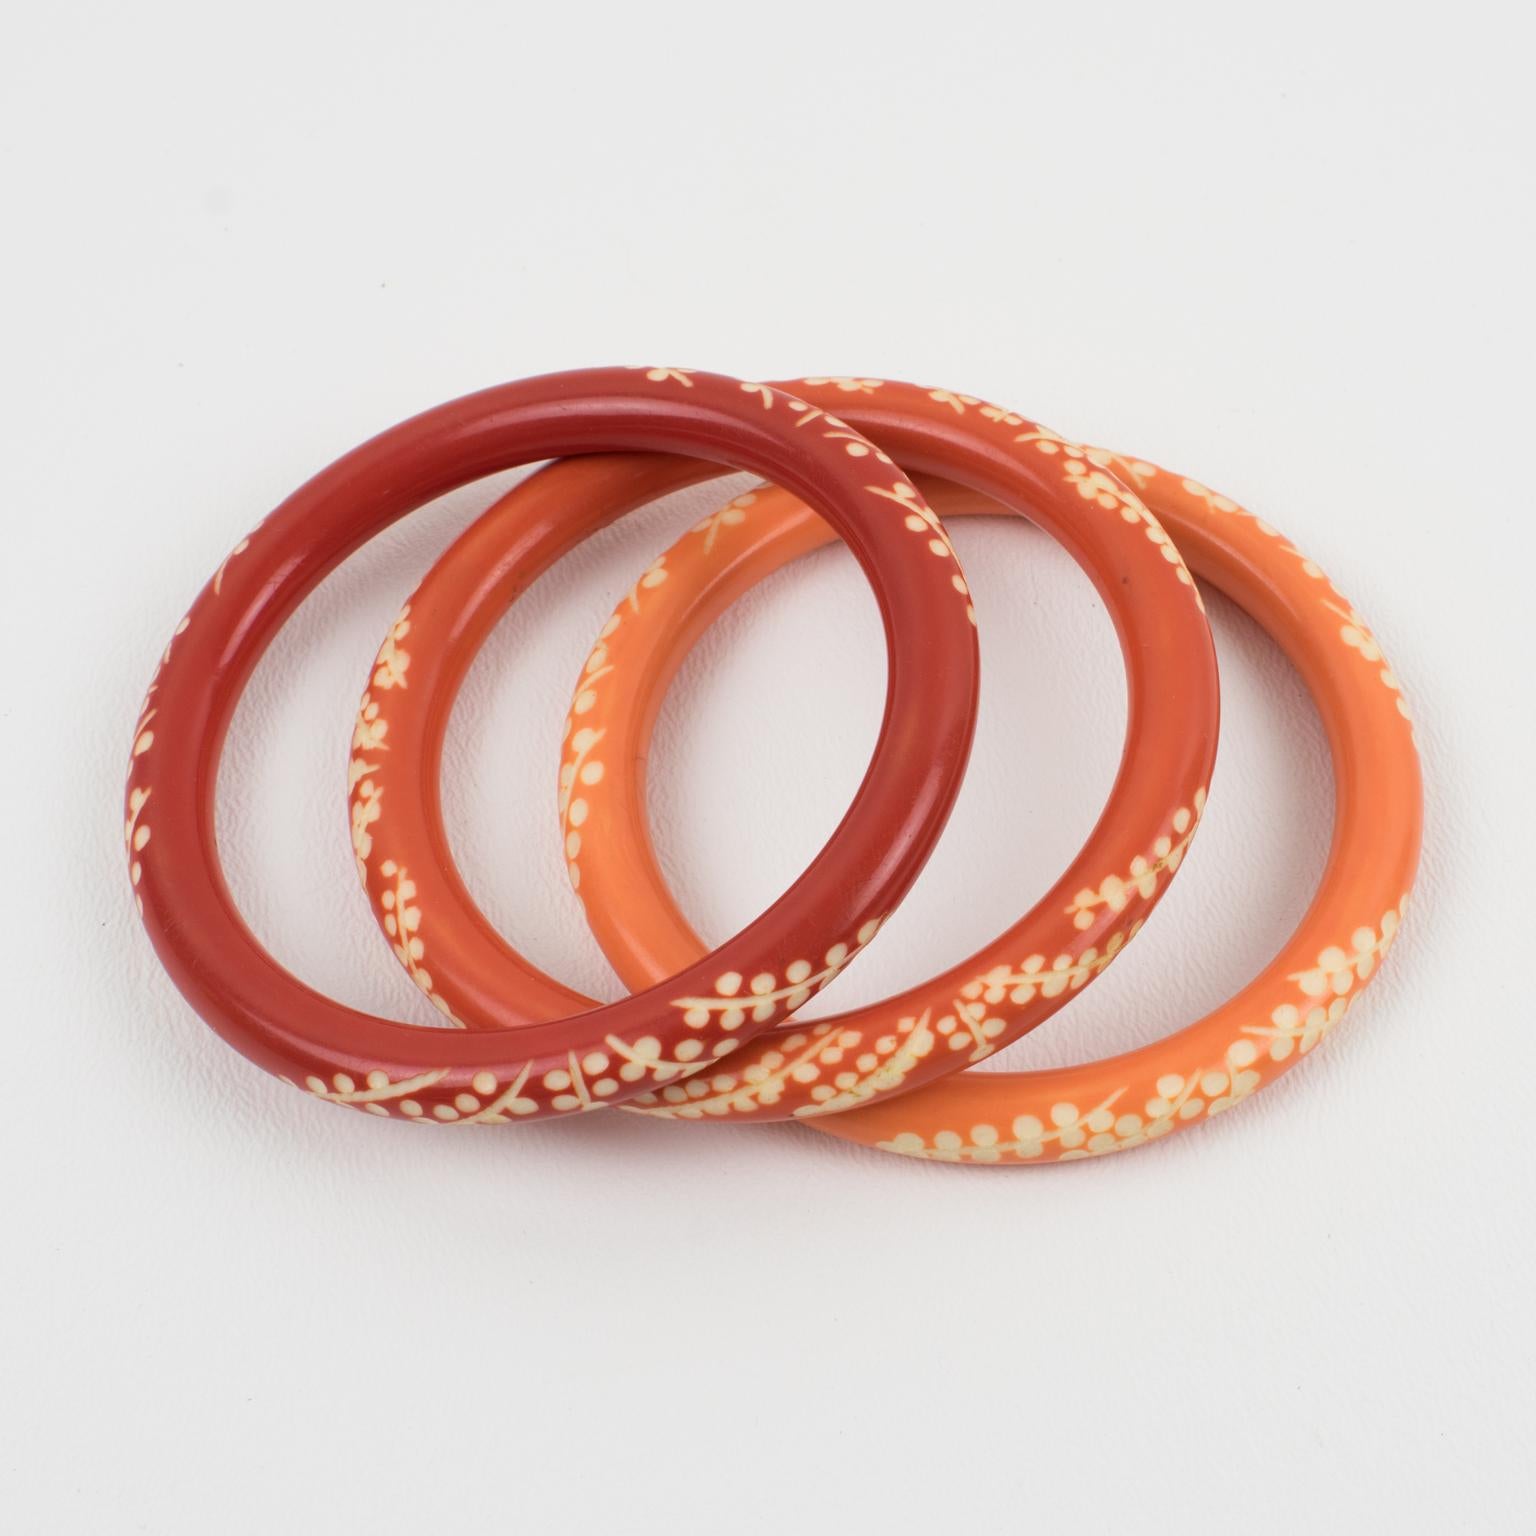 This lovely Galalith bracelet bangle set of three pieces features a chunky spacer domed shape with deep floral carving, all around. A trio of orange variations with peach pink, ginger orange, and orange-red spice colors over white background.